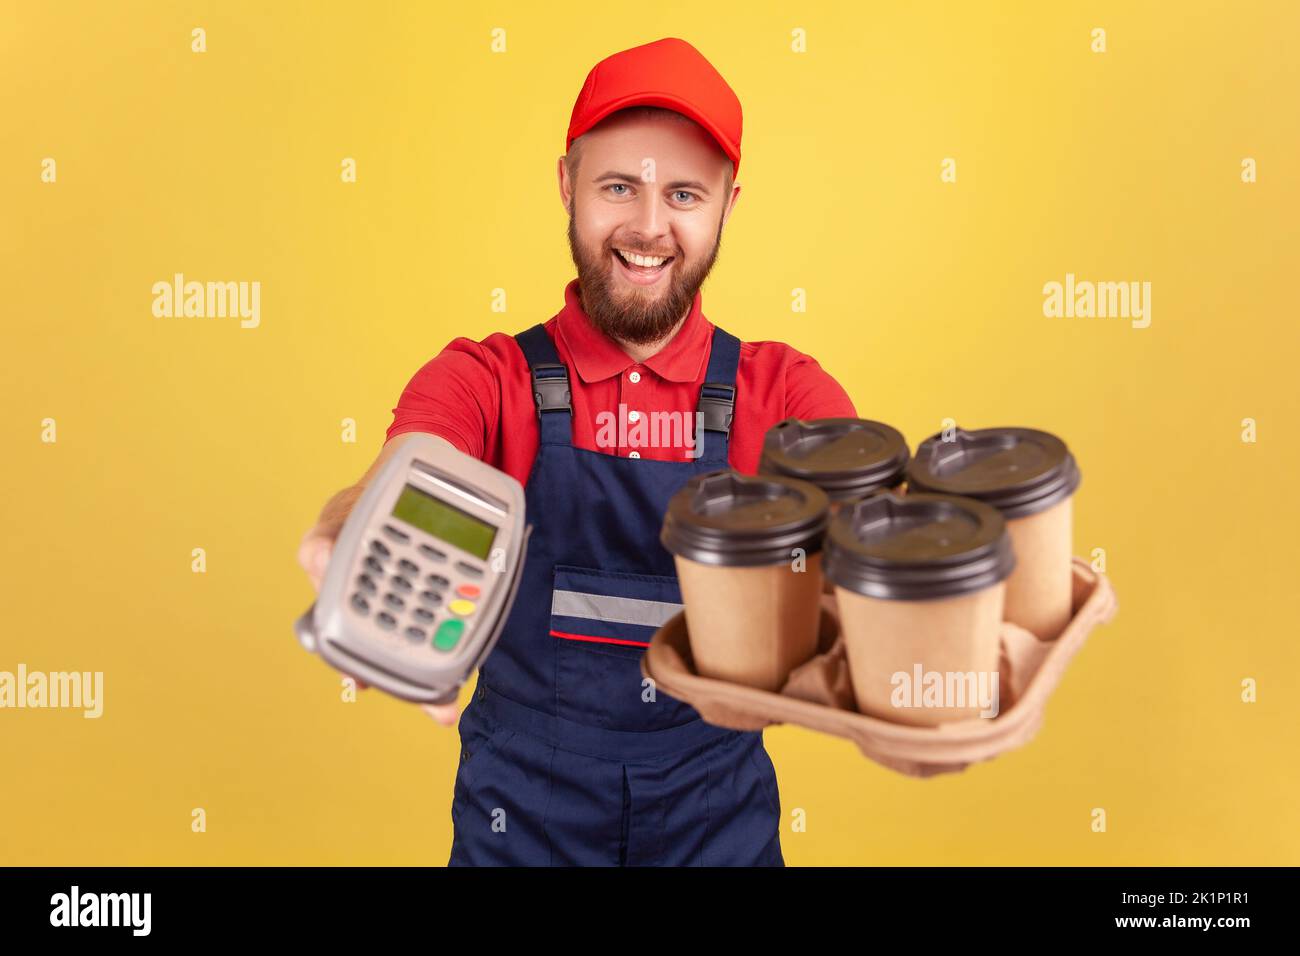 Friendly optimistic delivery man holding terminal and coffee with pizza box, looking at camera with happy expression, wearing overalls and cap. Indoor studio shot isolated on yellow background. Stock Photo